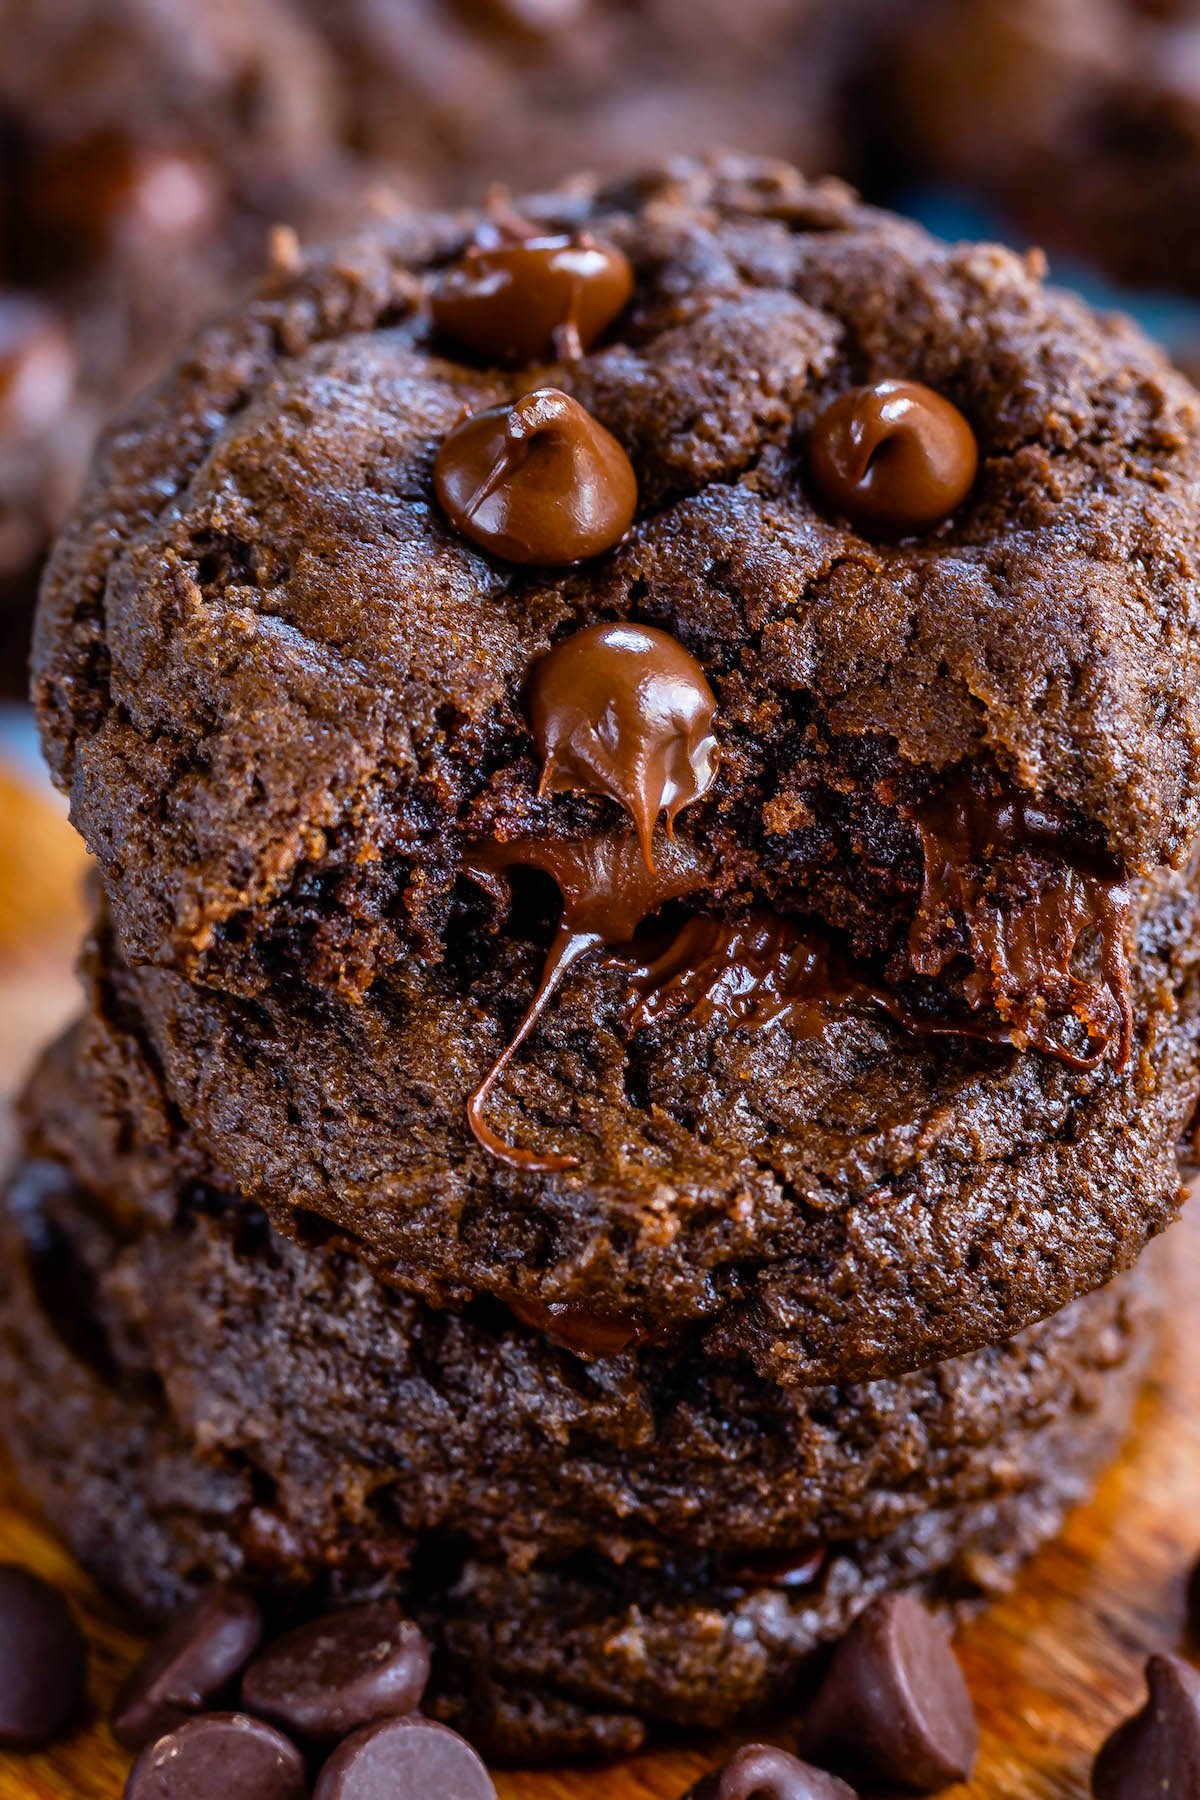 stacked chocolate cookies with chocolate chips baked in.